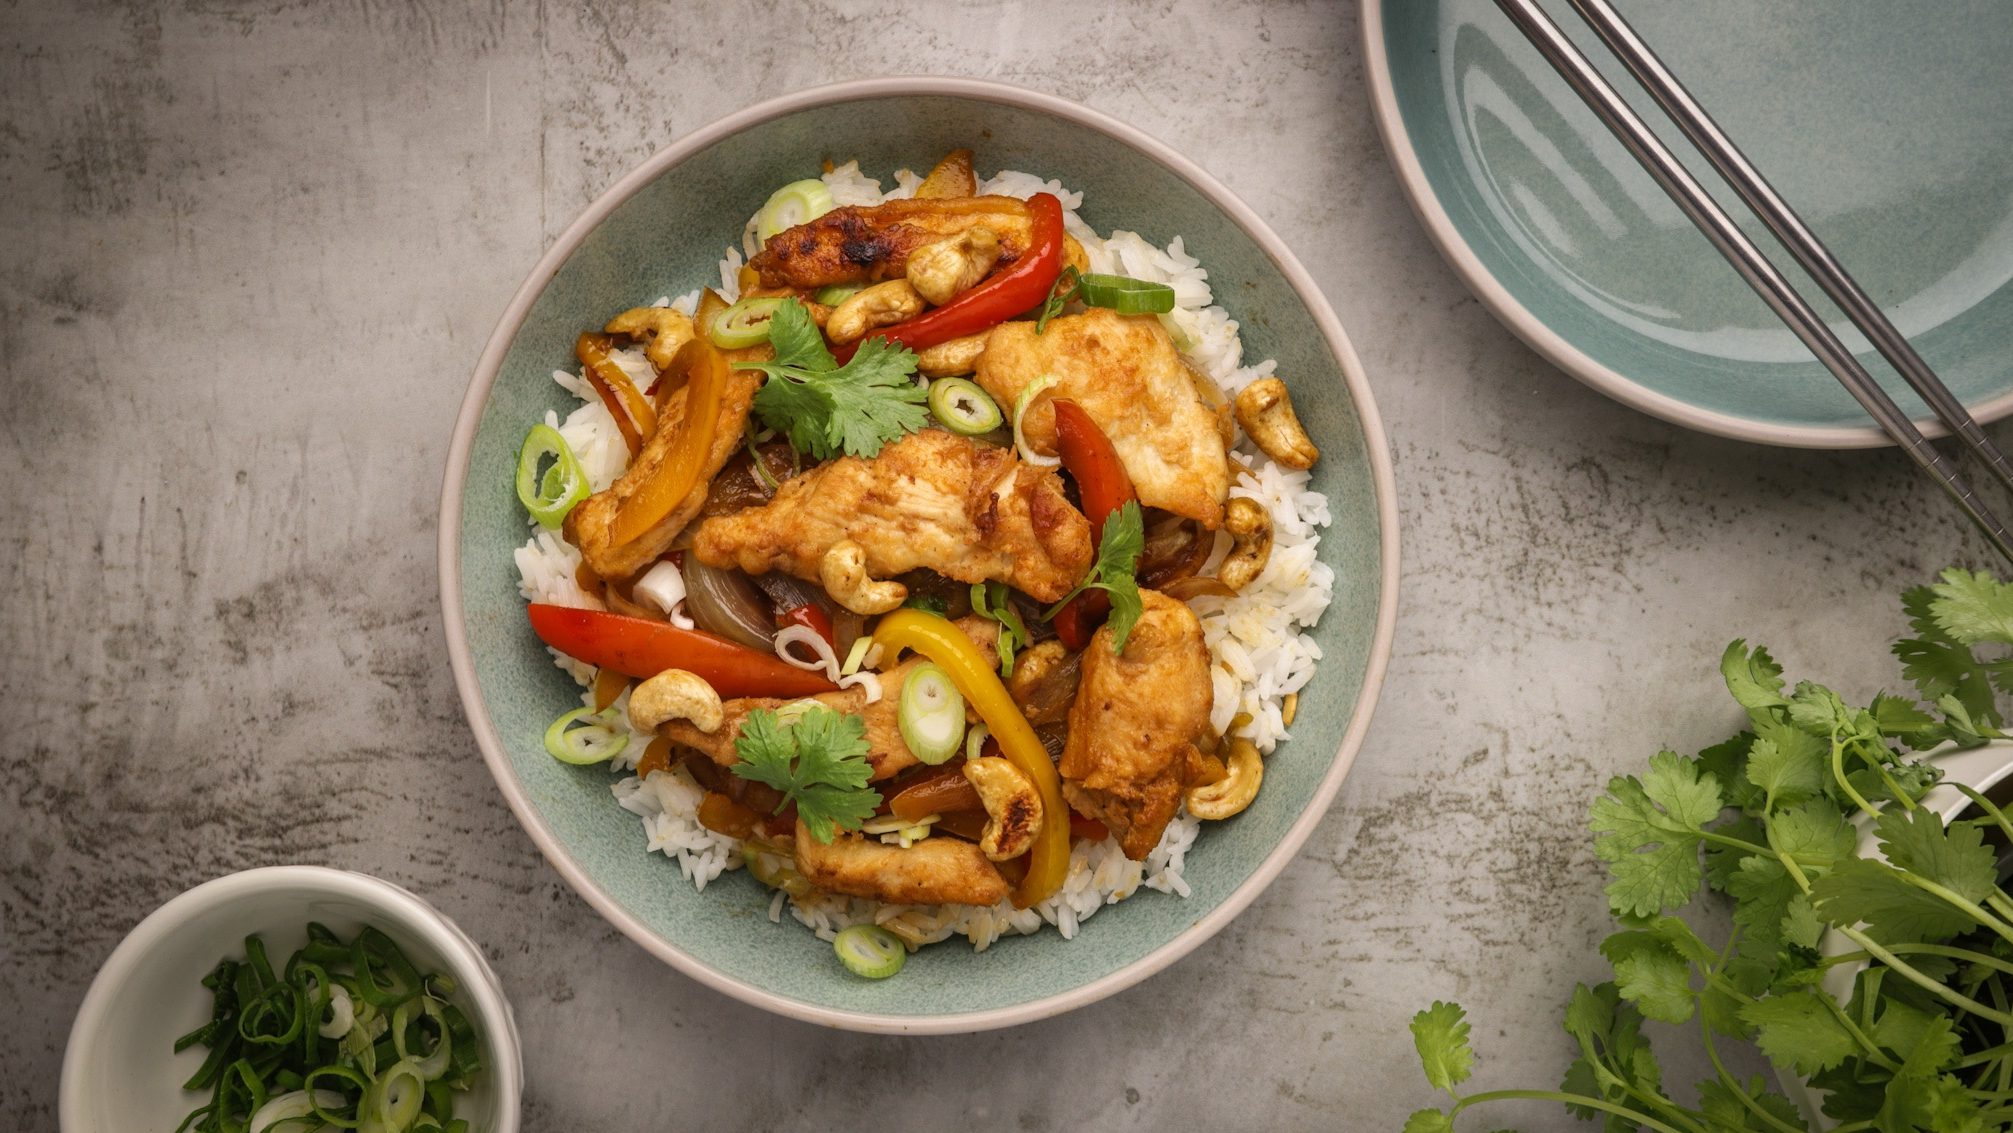 A bowl of chicken and vegetable stir-fry on white rice